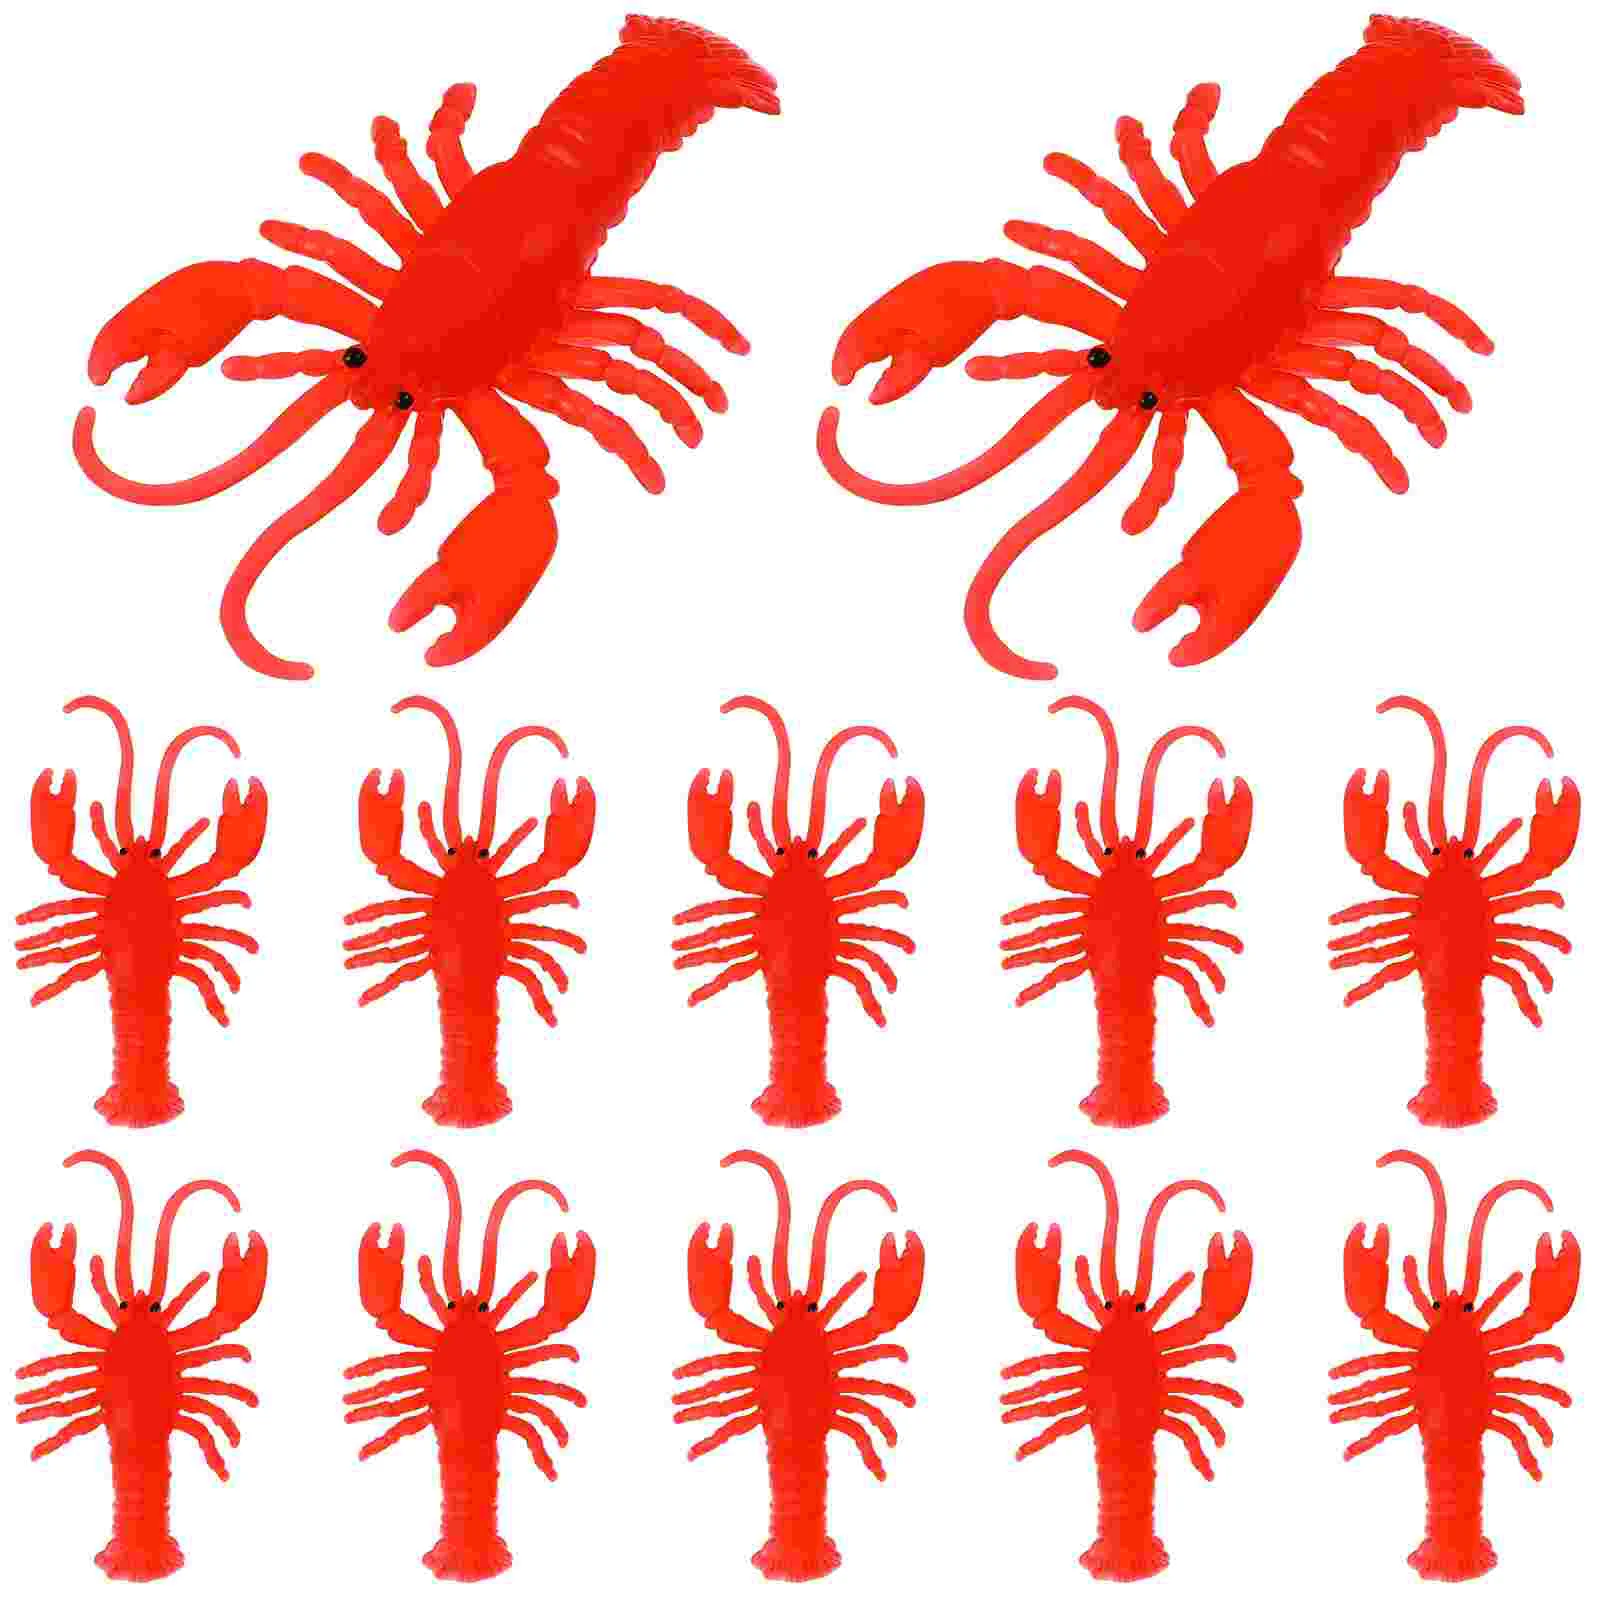 

12 Pcs Simulated Crayfish Crawfish Decorations Mini Animal Toys Seafood Boil Party Supplies Lobster Plastic Child Animals